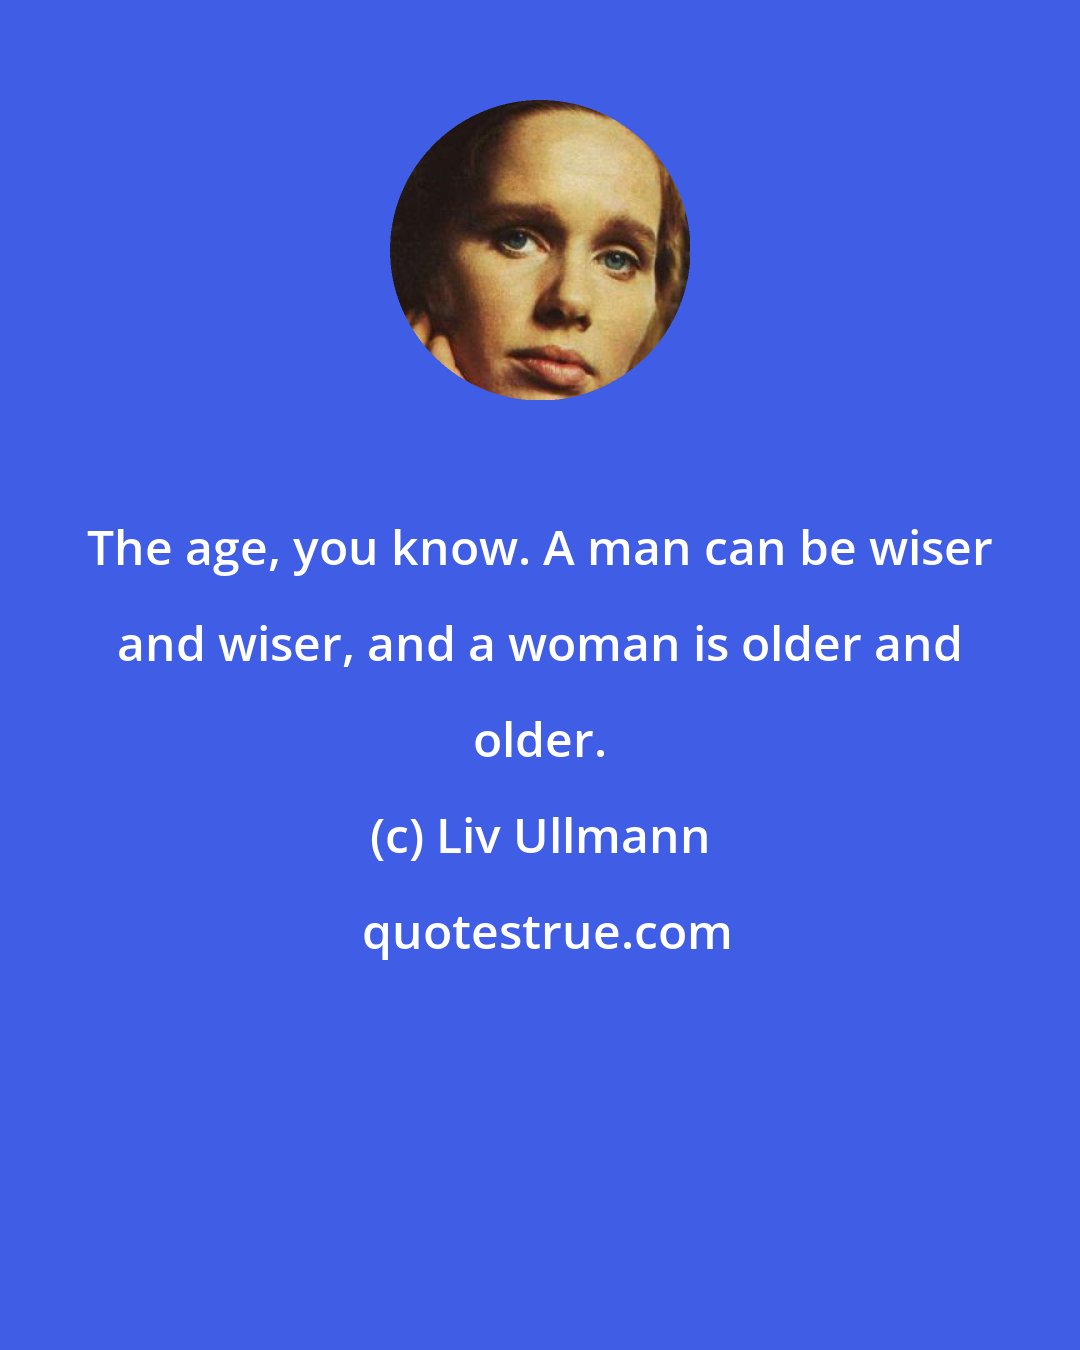 Liv Ullmann: The age, you know. A man can be wiser and wiser, and a woman is older and older.